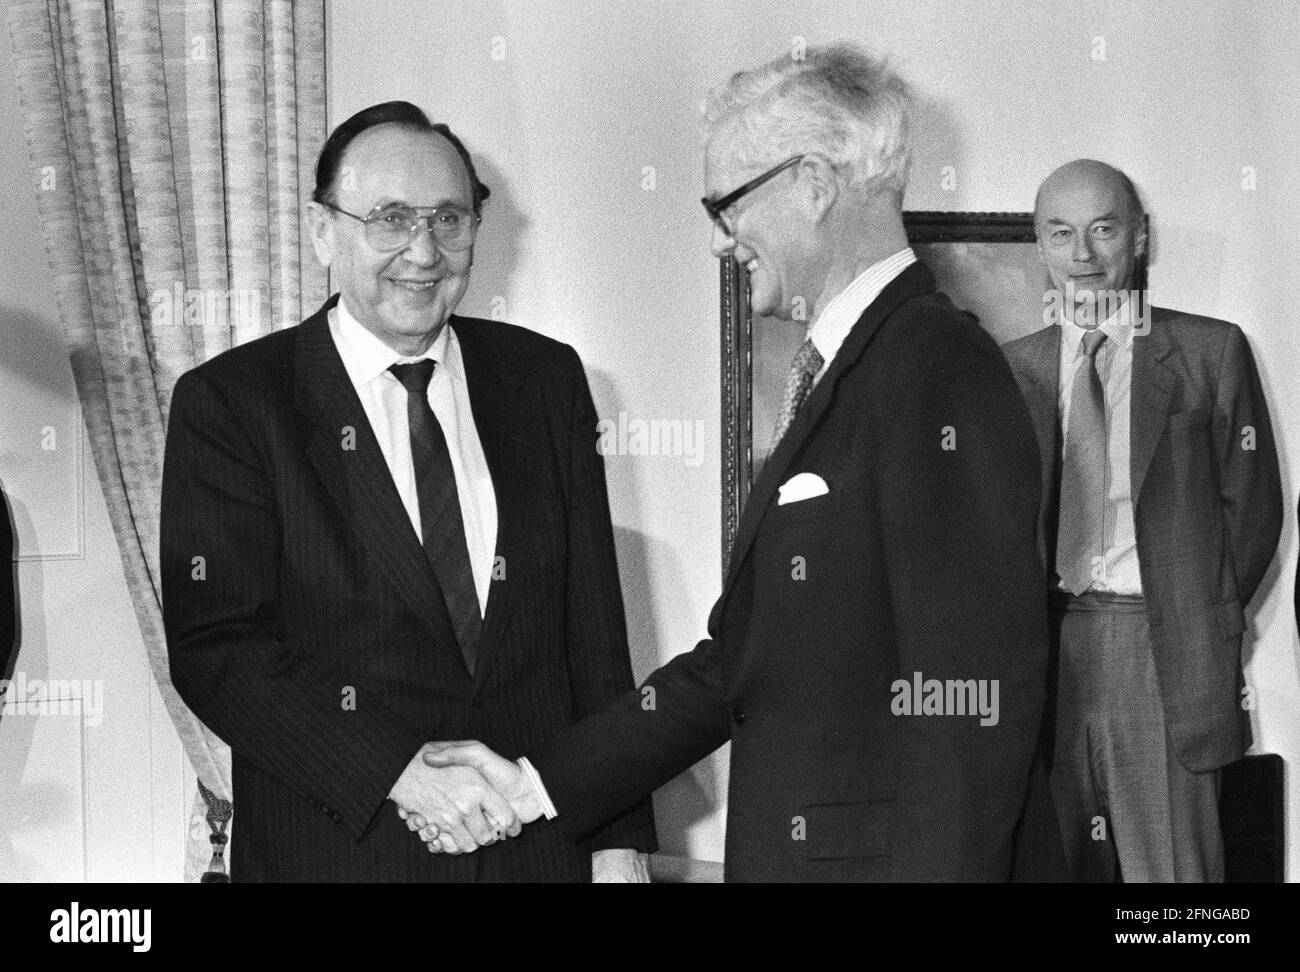 Germany, Bonn, 15.11.1989. Archive No: 10-51-05 Great Britain's Foreign Minister in Bonn Photo: Hans-Dietrich Genscher and Douglas Hurd [automated translation] Stock Photo